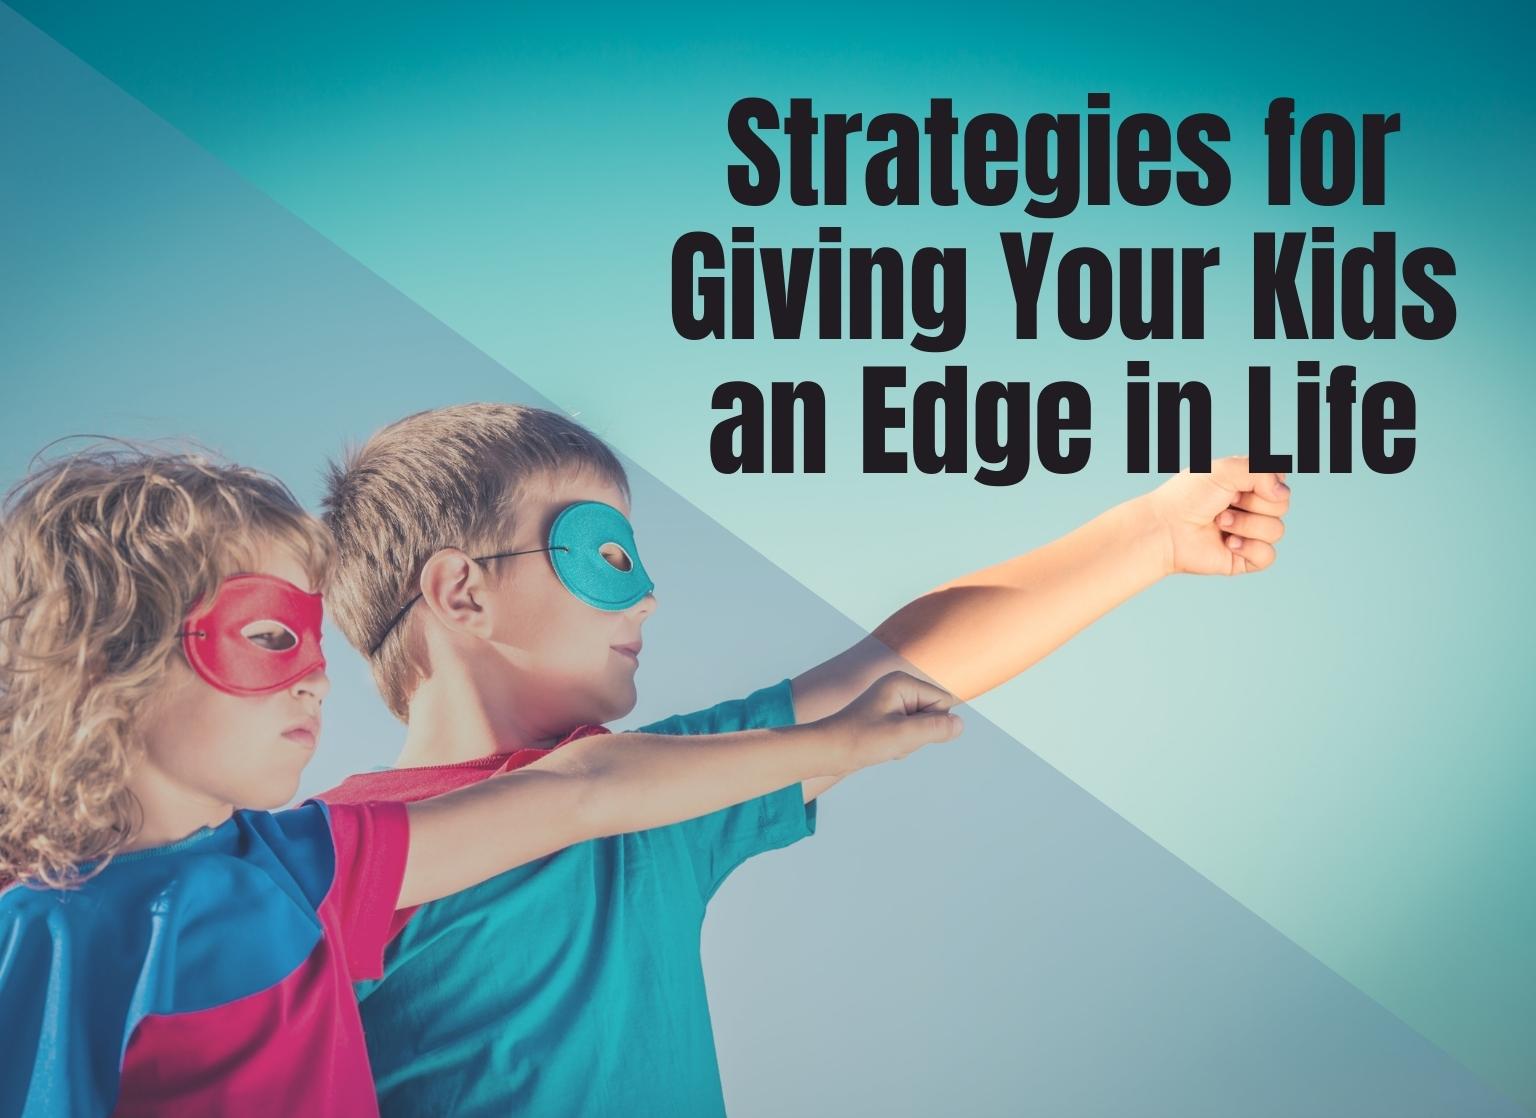 Strategies Give Kids Edge in Life-title